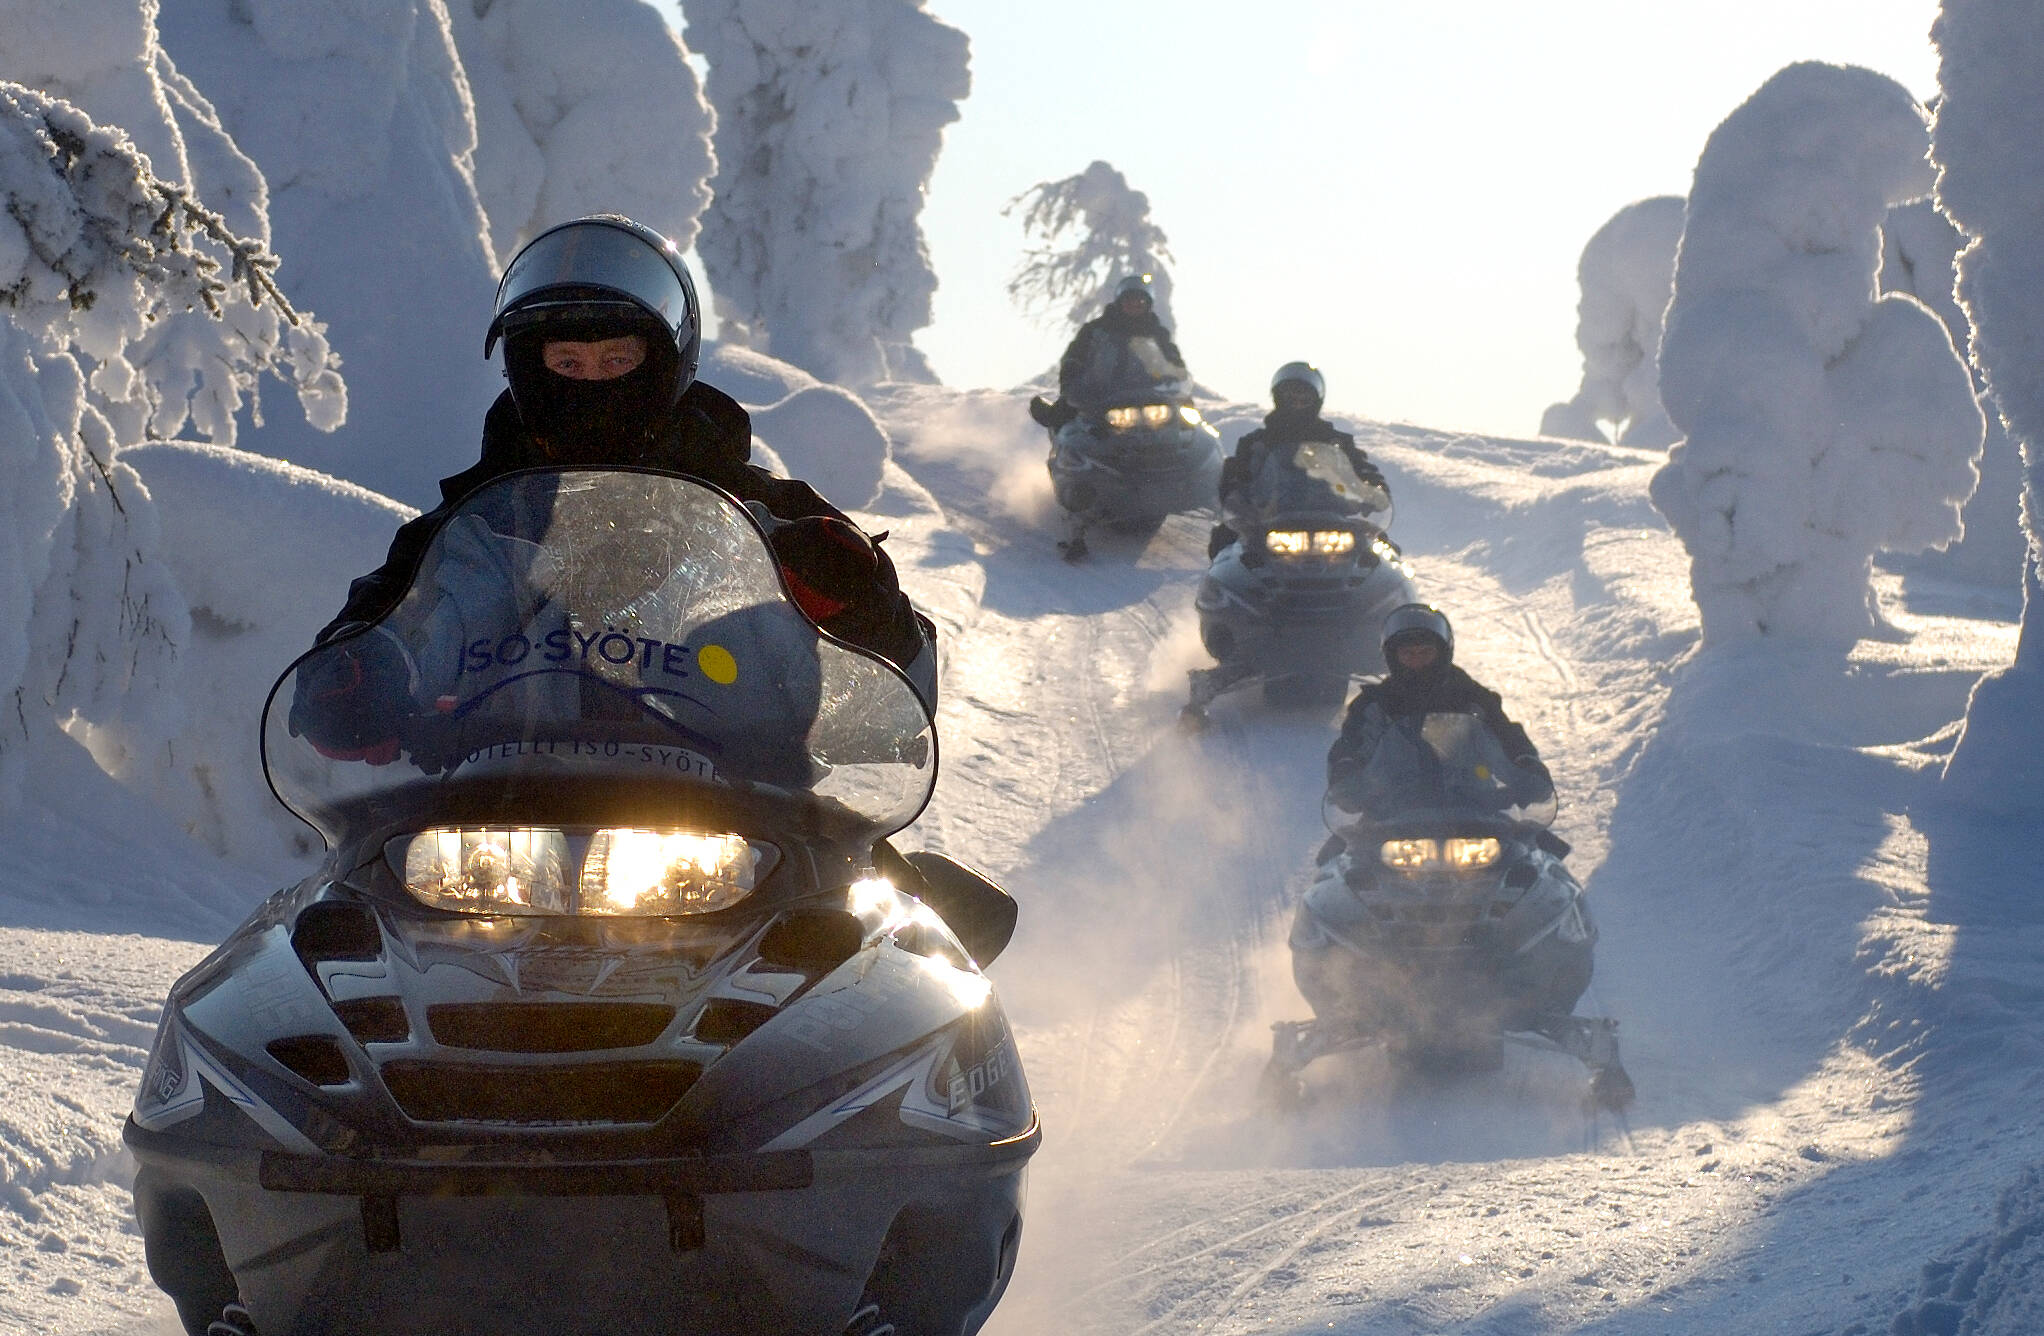 Group of people driving snowmobiles in a snowy landscape